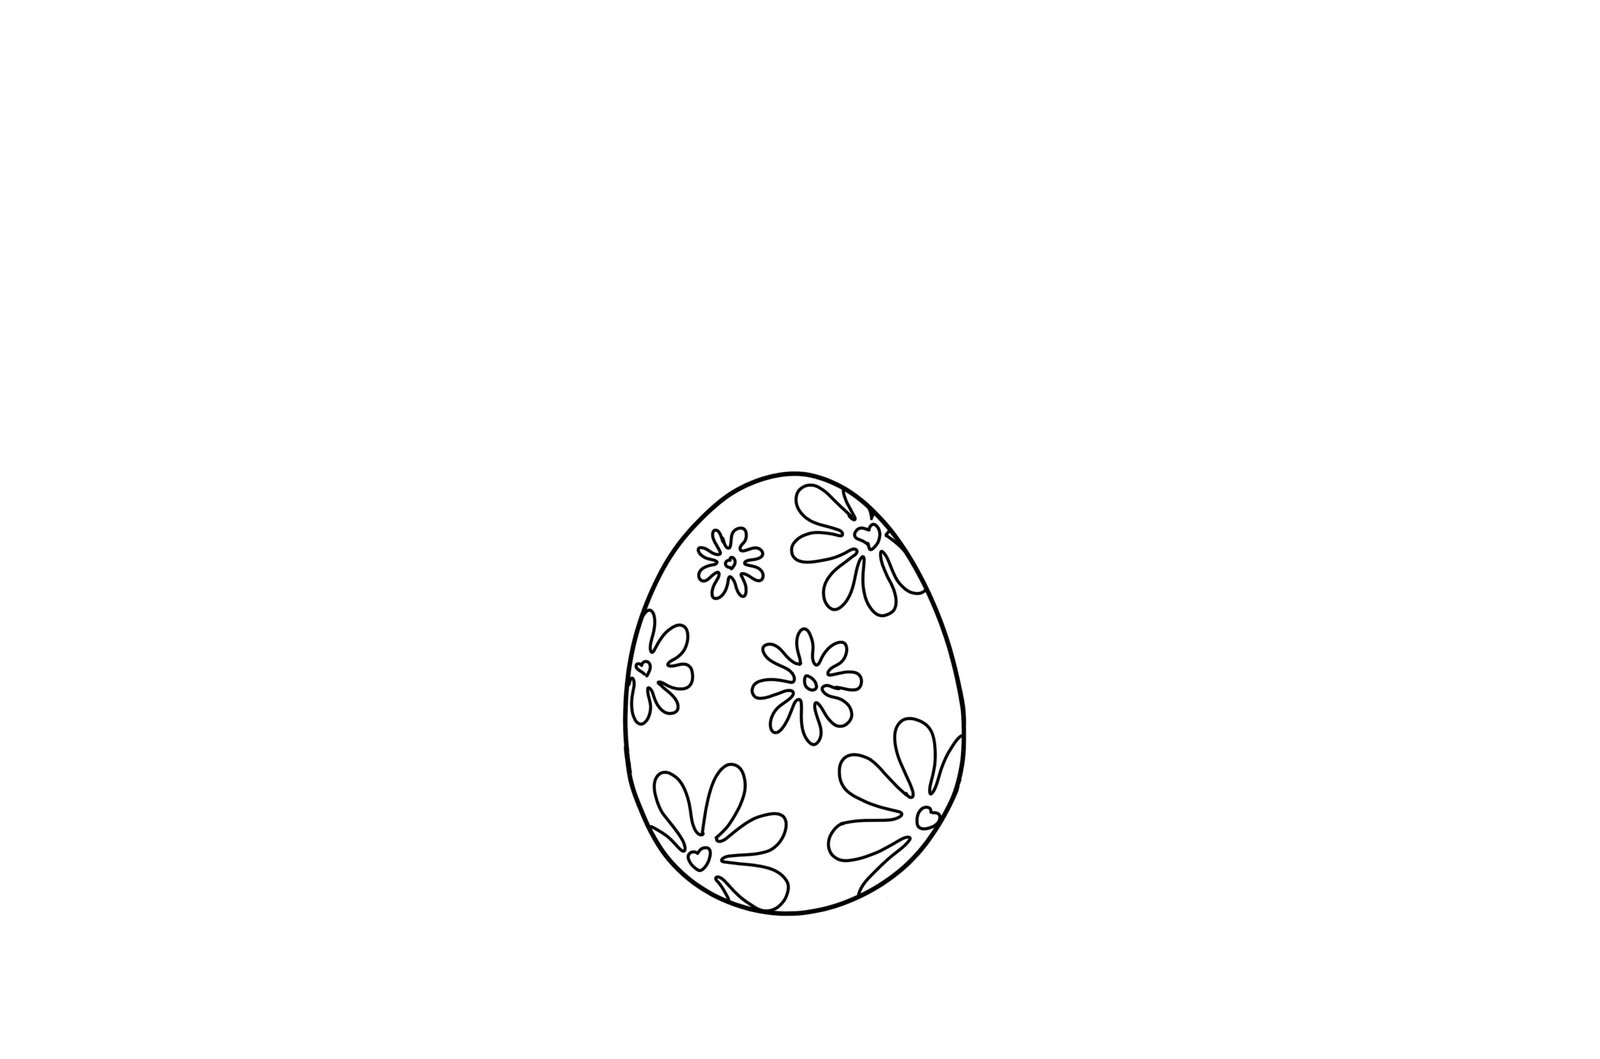 Easter Egg With Simple Flower Patterns Coloring Page